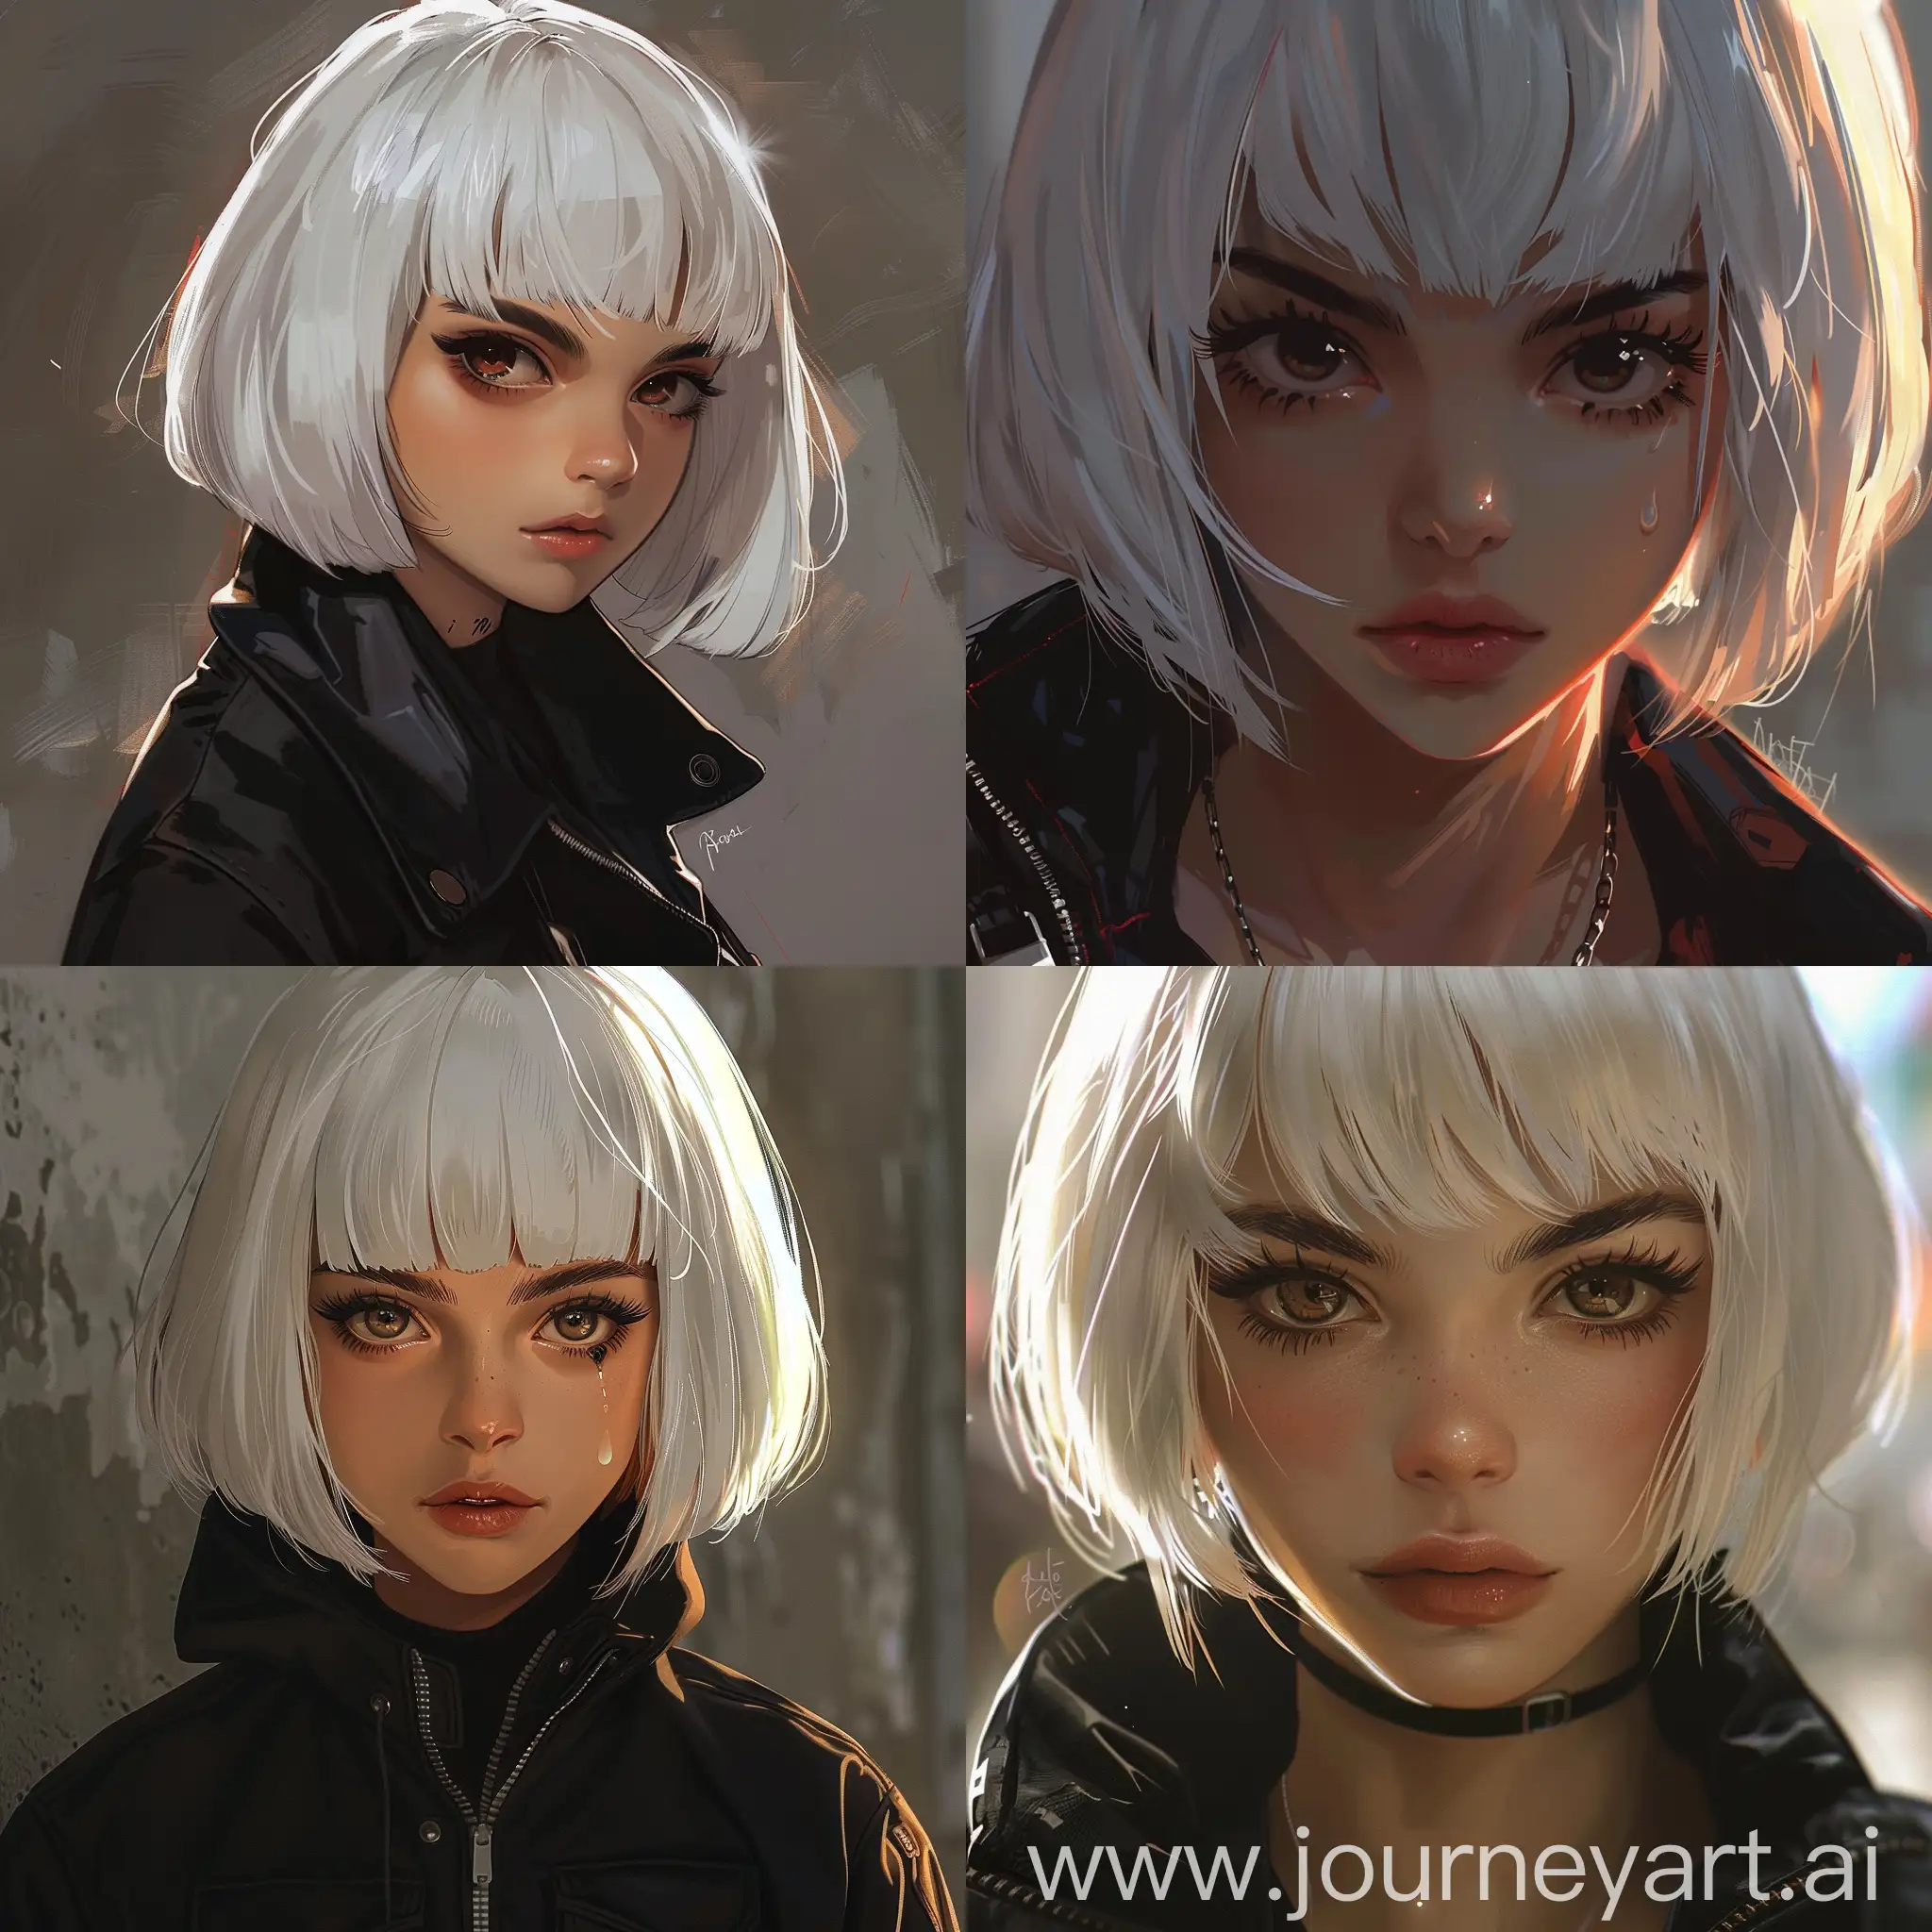 anime style, character concept, close up character design, short white hair, curtain bangs, badass, beautiful young woman, brown eyes, sharp eyes, serious, sharp, thick eyebrows, black jacket, detailed, street. retro